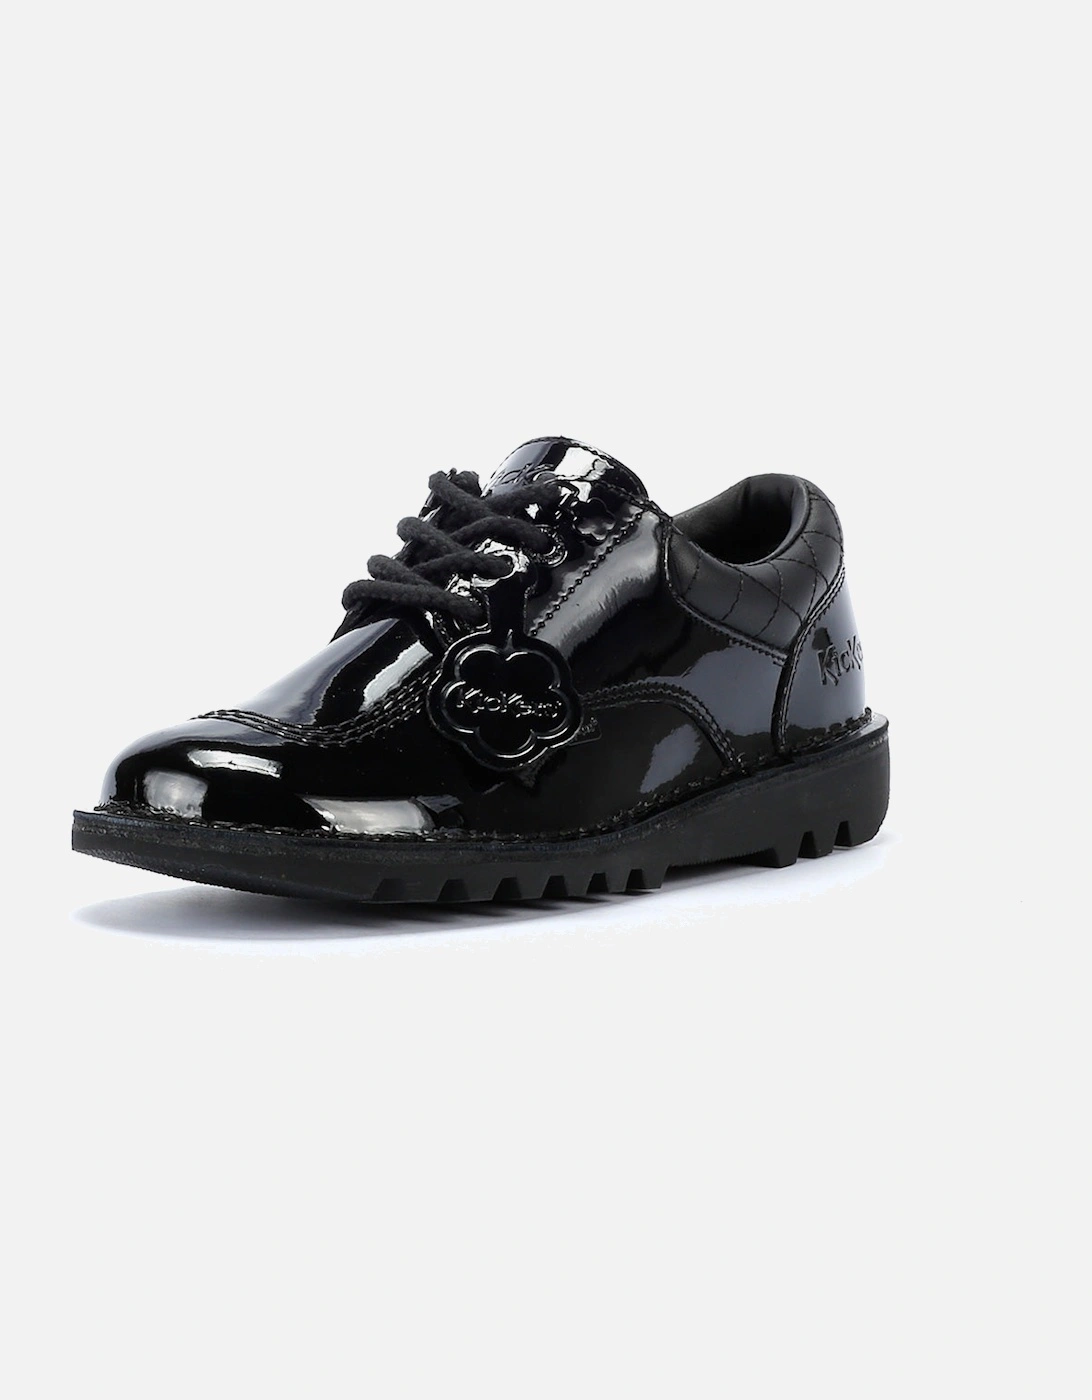 Kick Lo Youth Quilted Patent Black Shoes